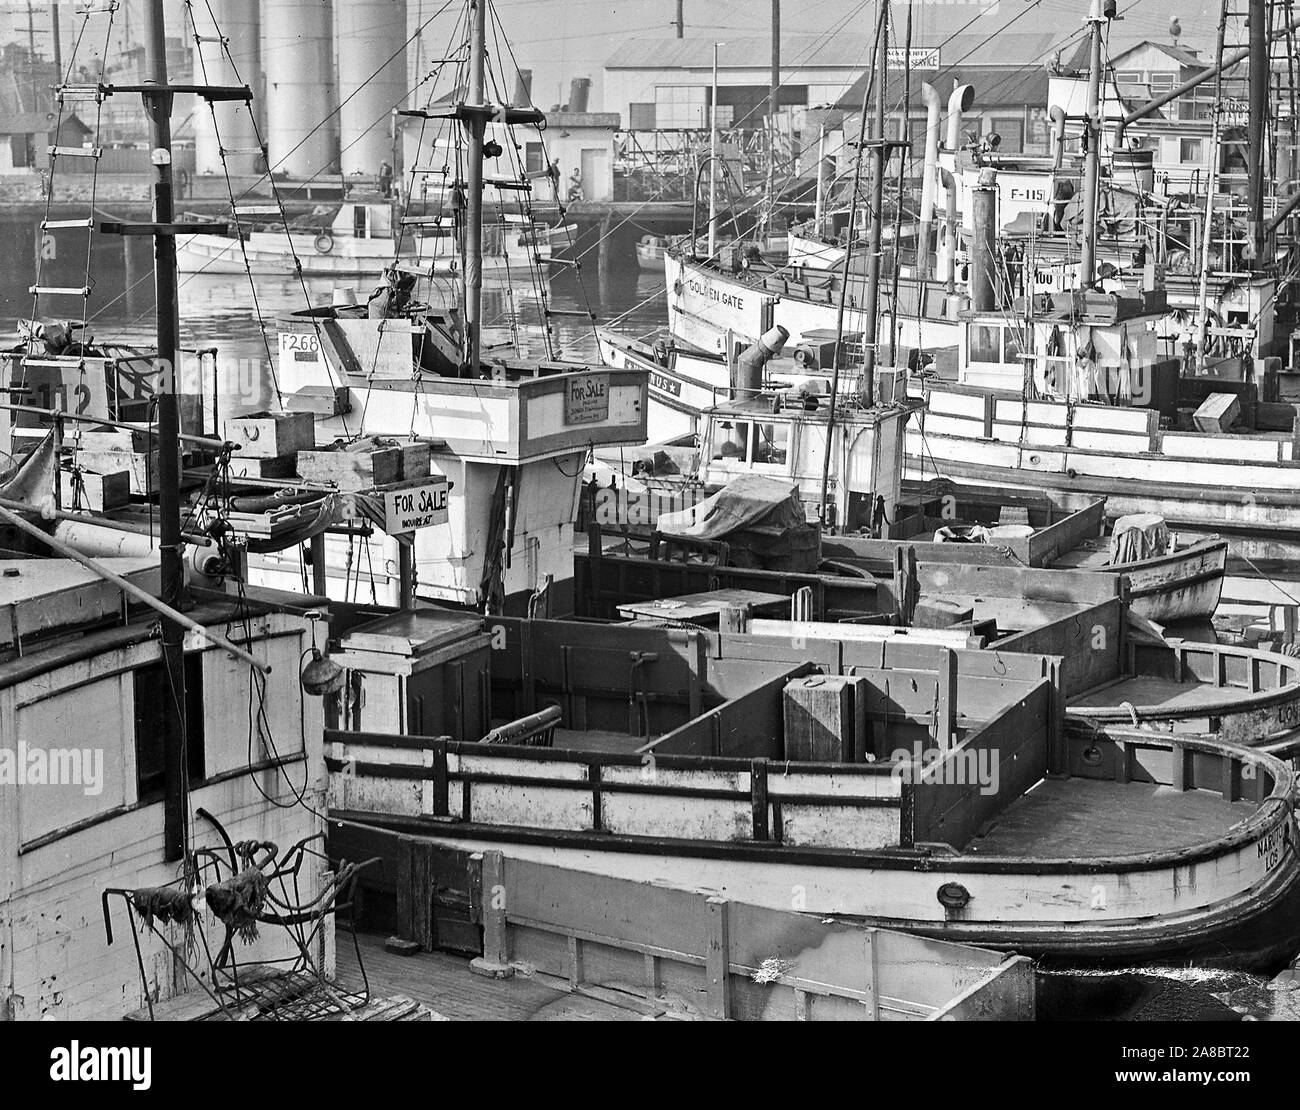 Fishing boats, formerly operated by residents of Japanese ancestry, are tied up for the duration at Terminal Island in Los Angeles harbor 4/7/1942 Stock Photo